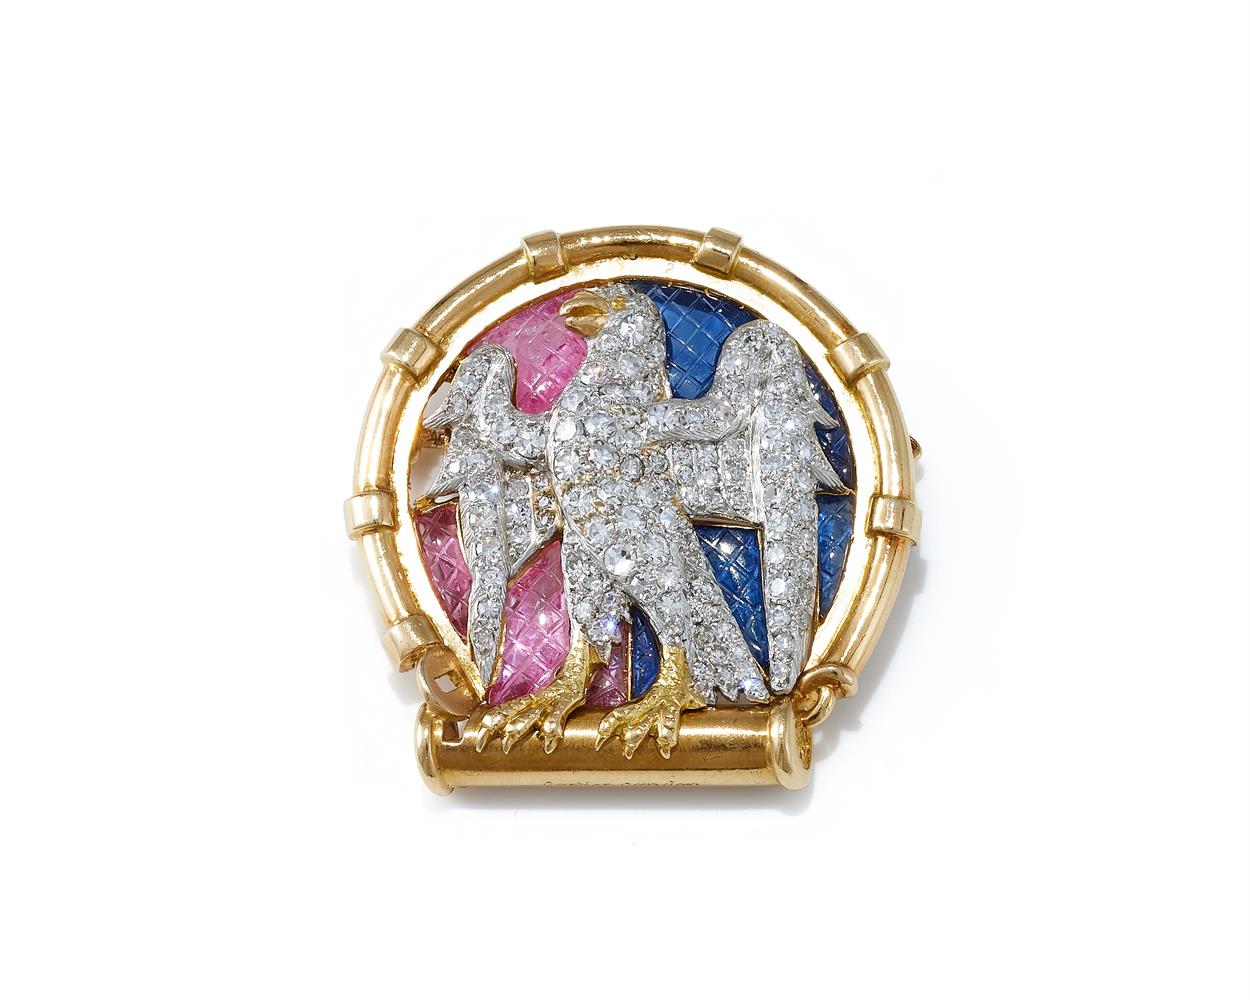 CARTIER, THE 'ELTHAM PALACE' DIAMOND AND GEM SET BROOCHES - Image 2 of 7